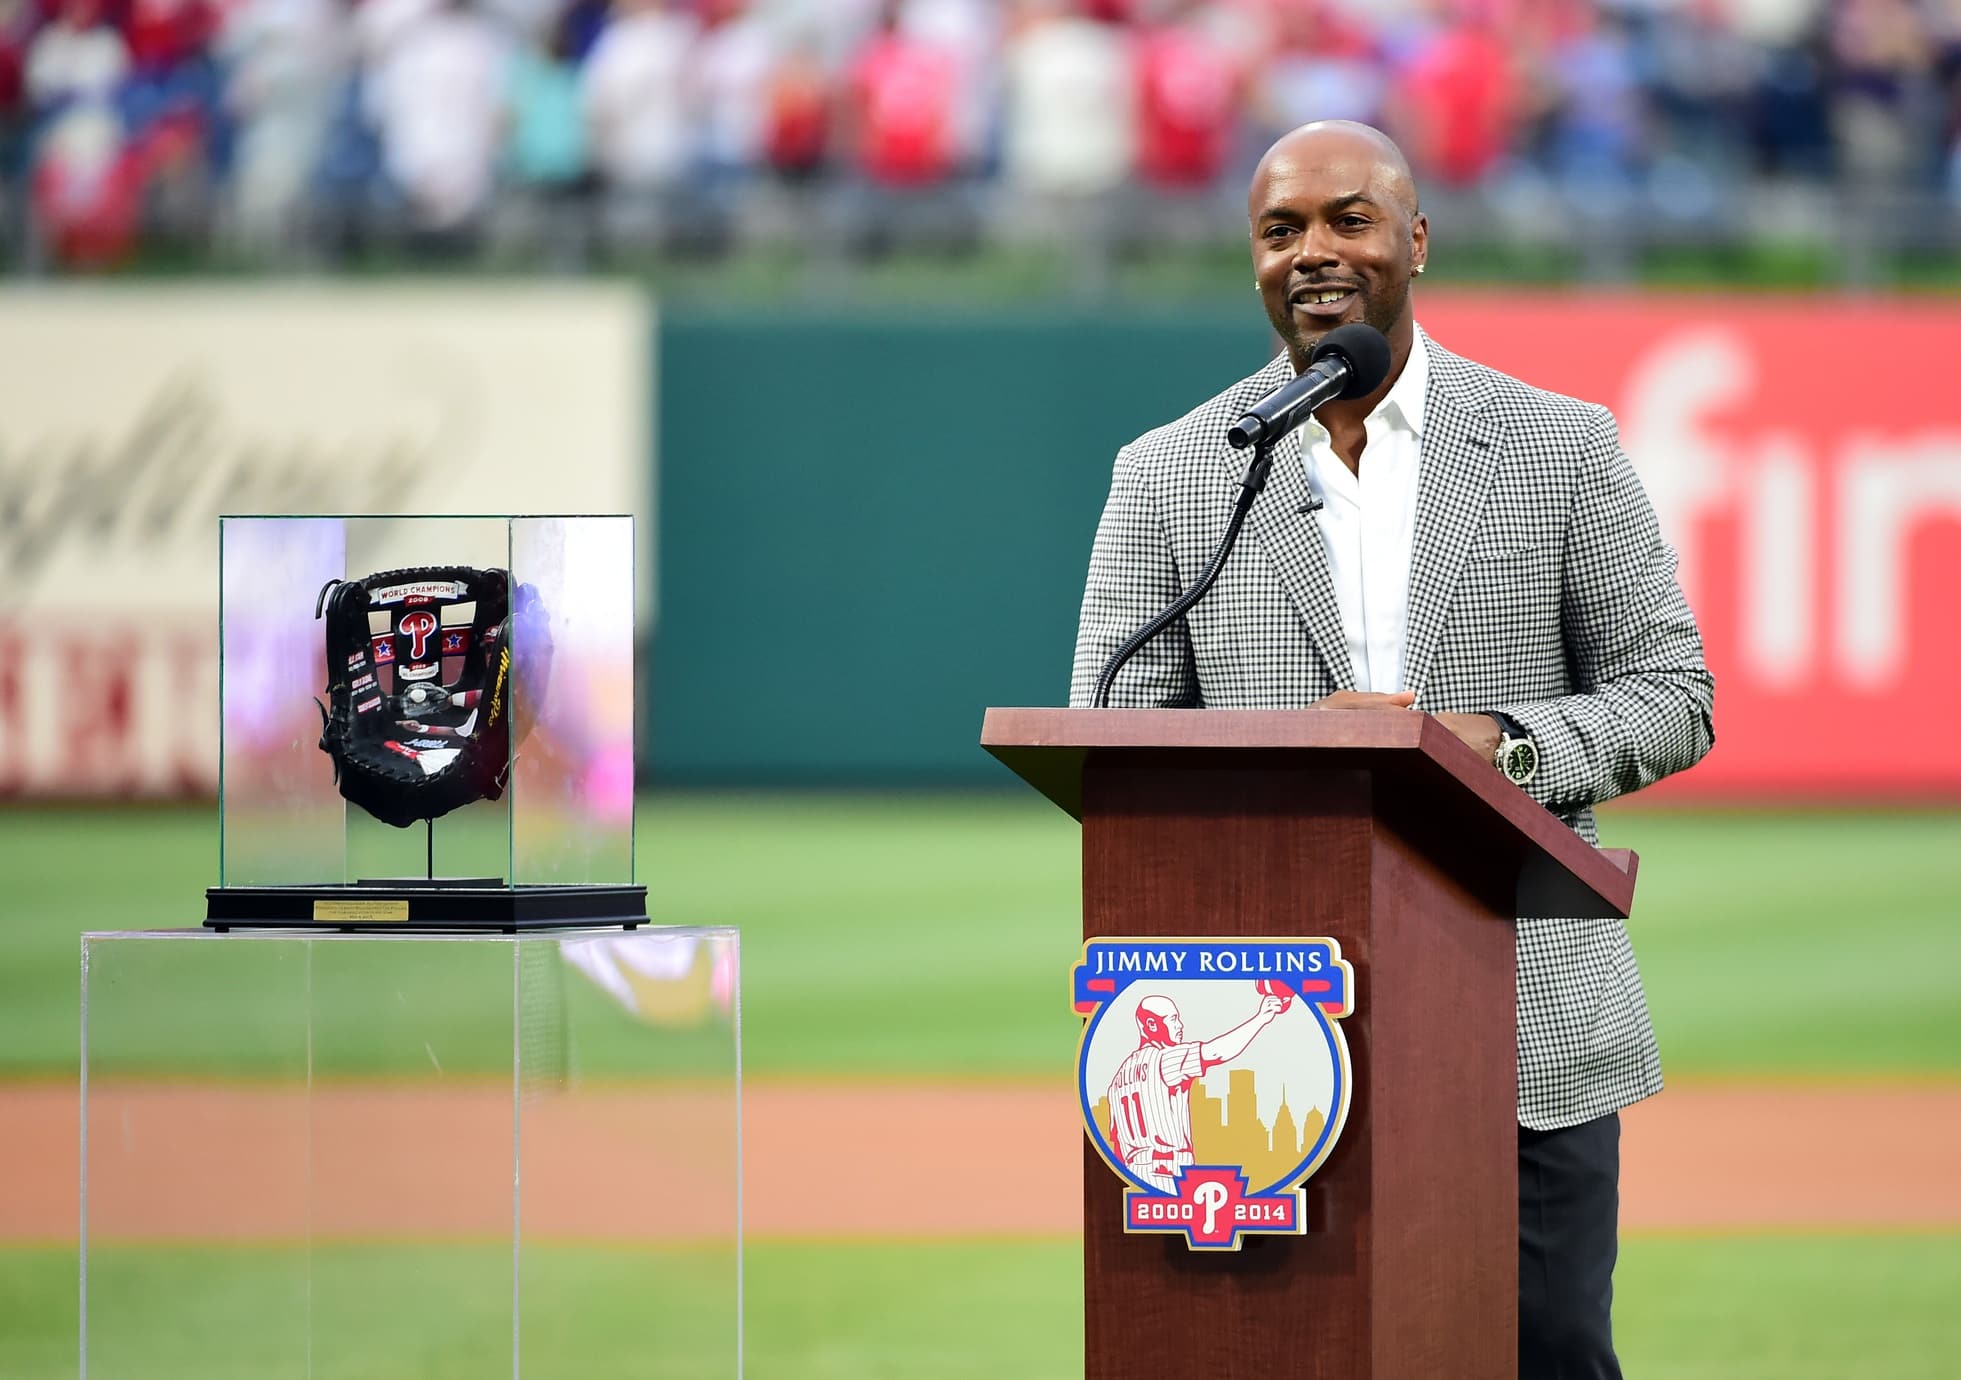 Jimmy Rollins Almost Fought Cliff Lee in the Clubhouse Over Country Music